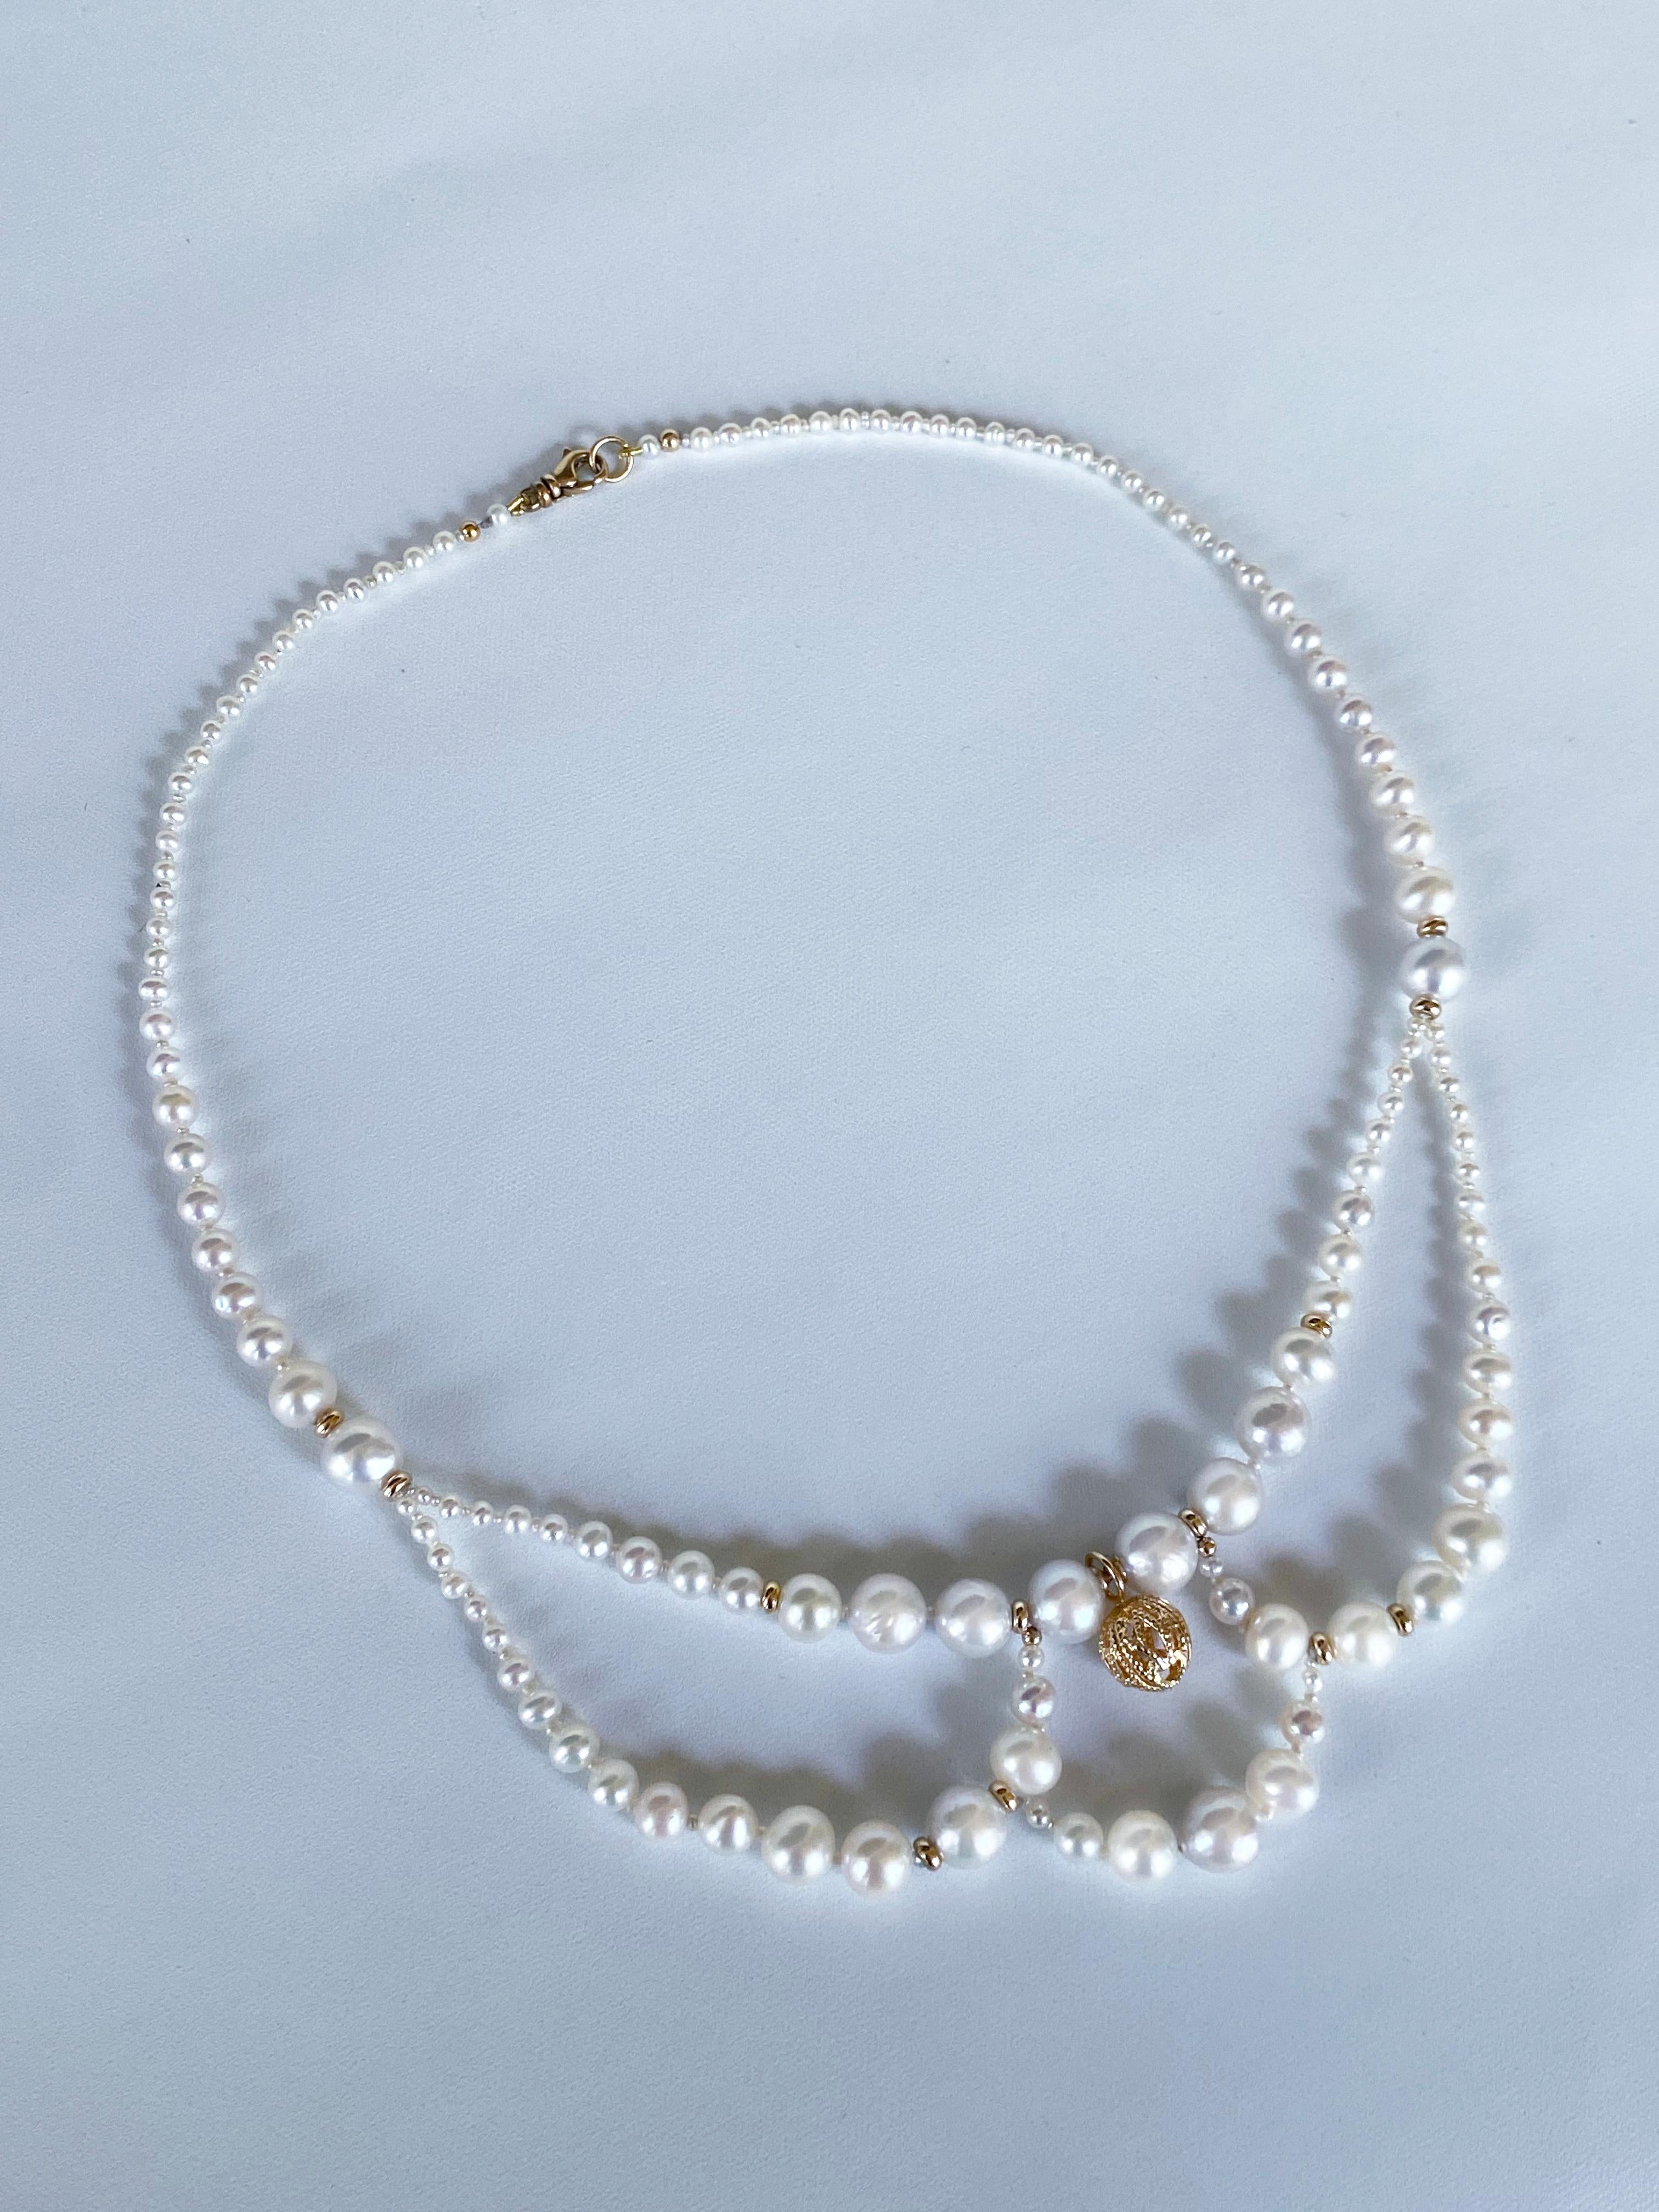 Artisan Marina J. Draped Victorian Inspired Pearl & Solid 14k Yellow Gold Necklace For Sale